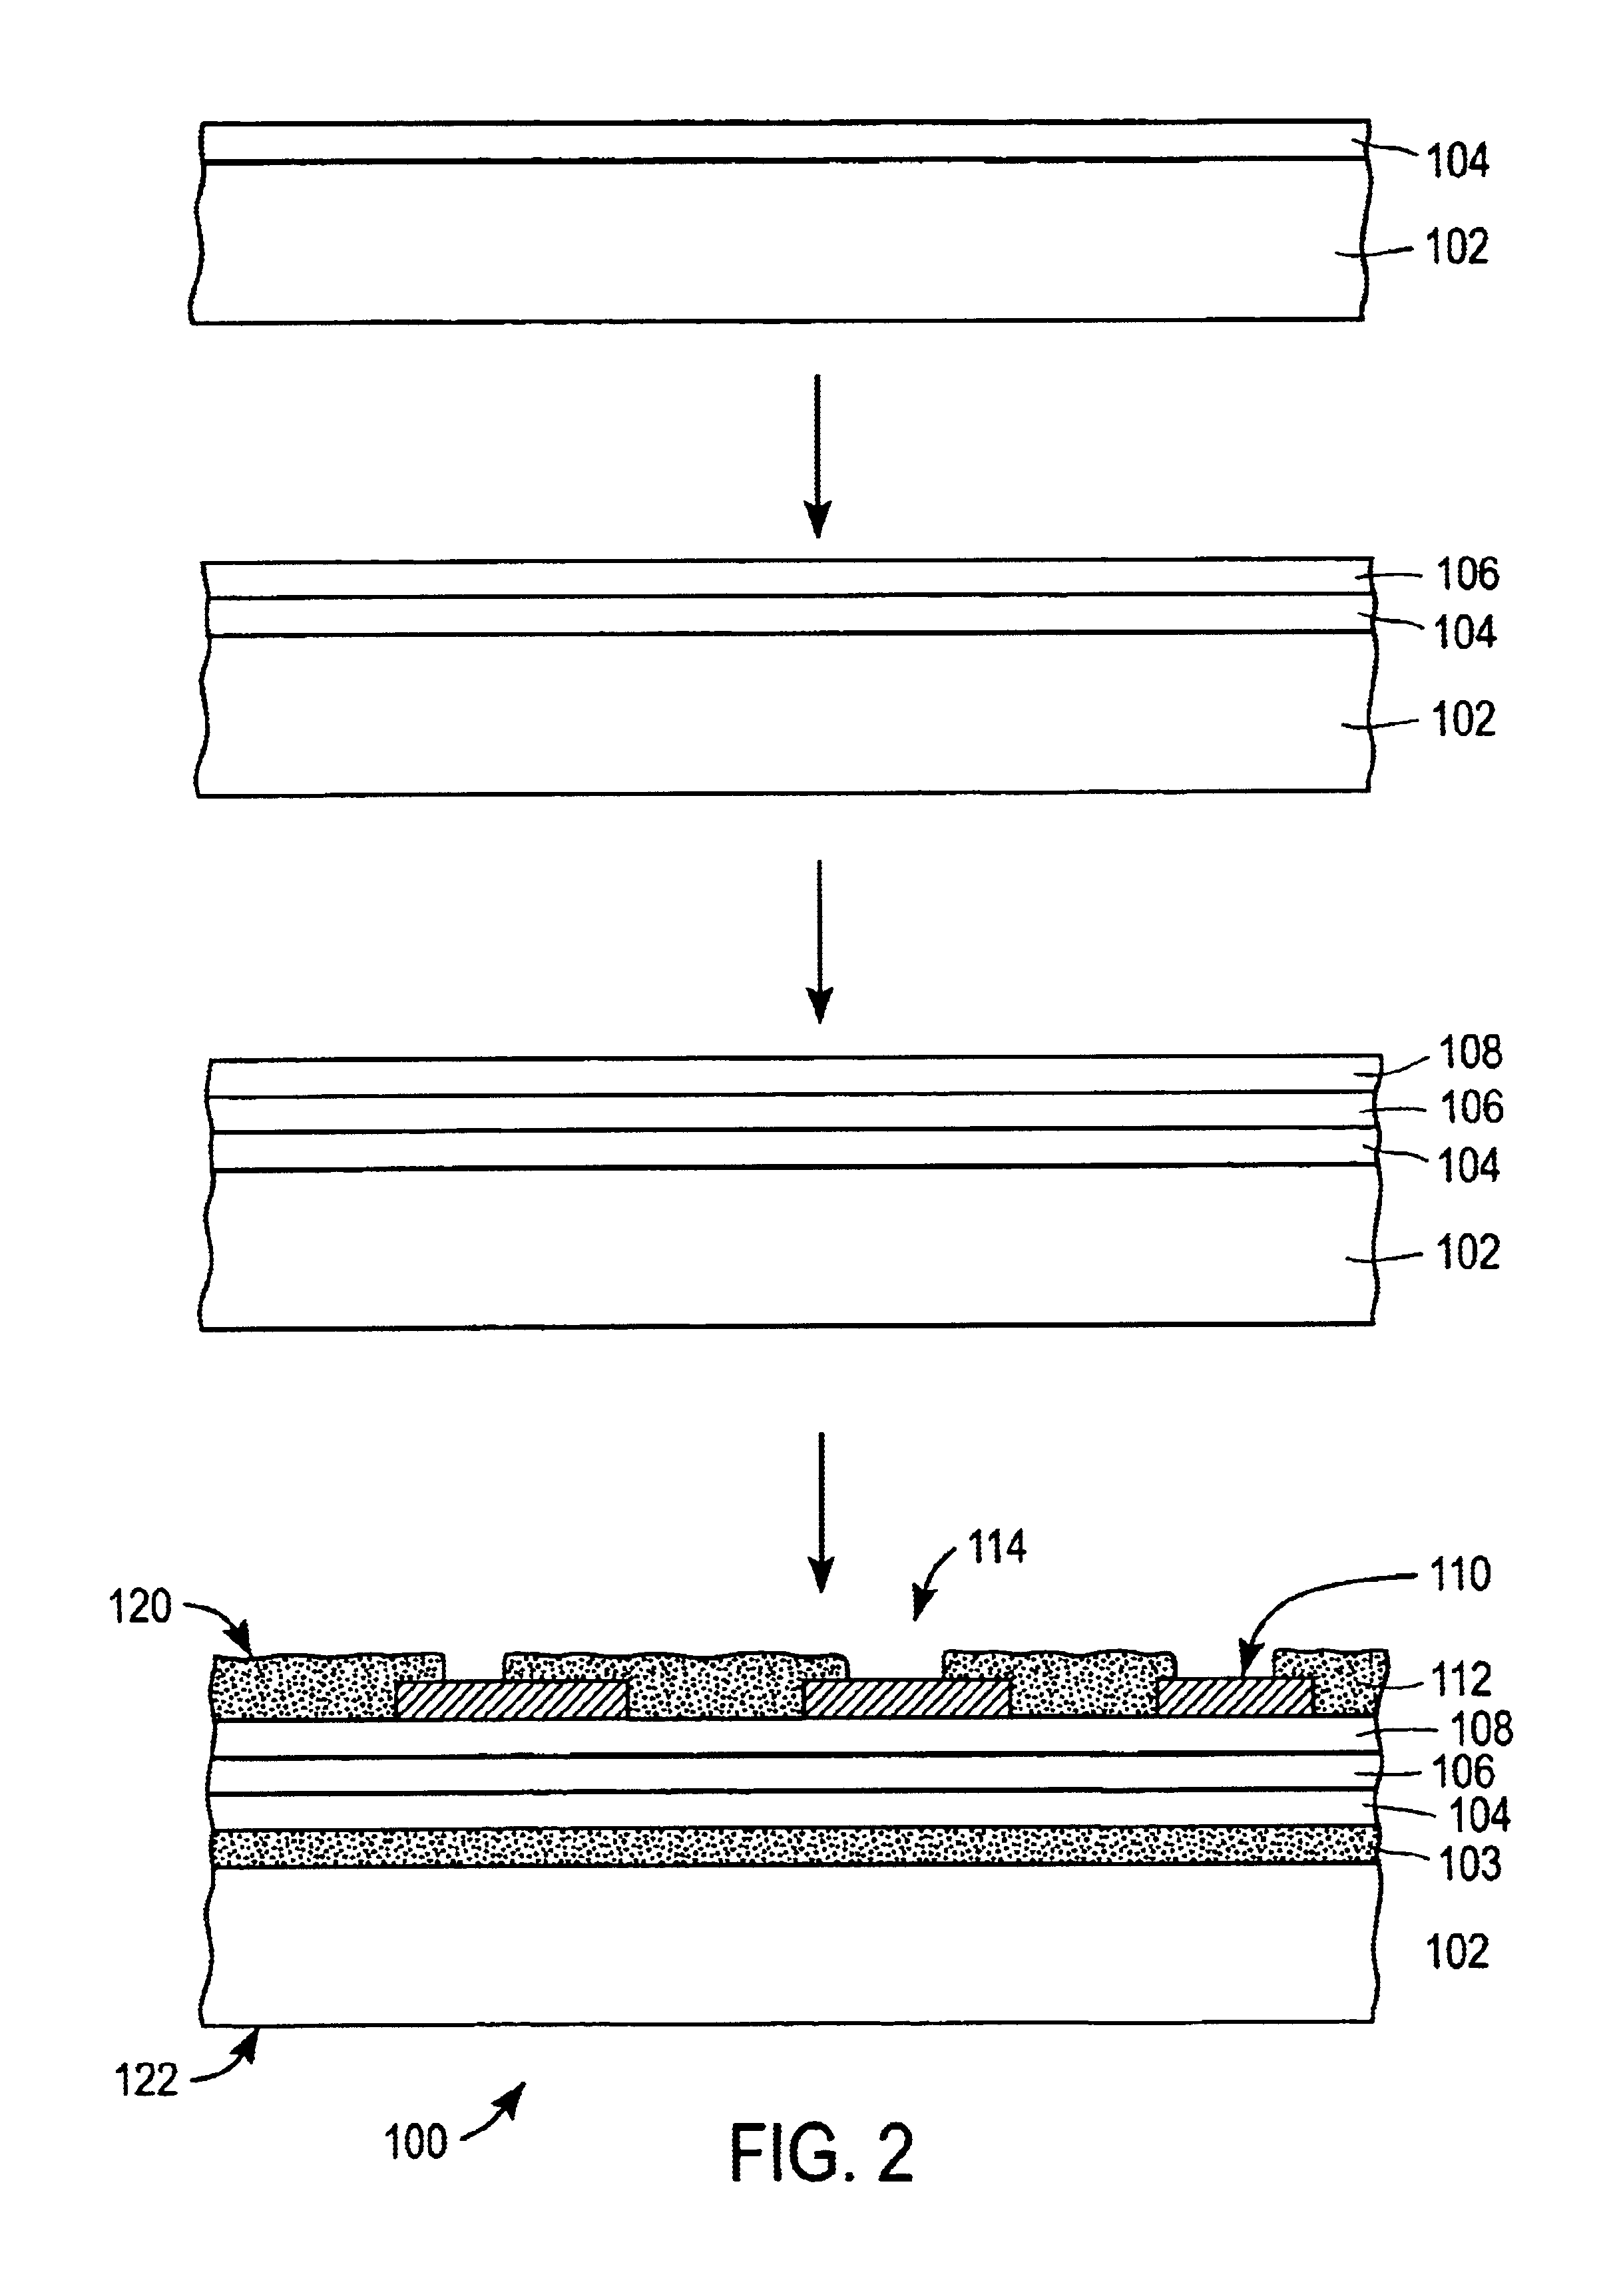 Split-fabrication for light emitting display structures